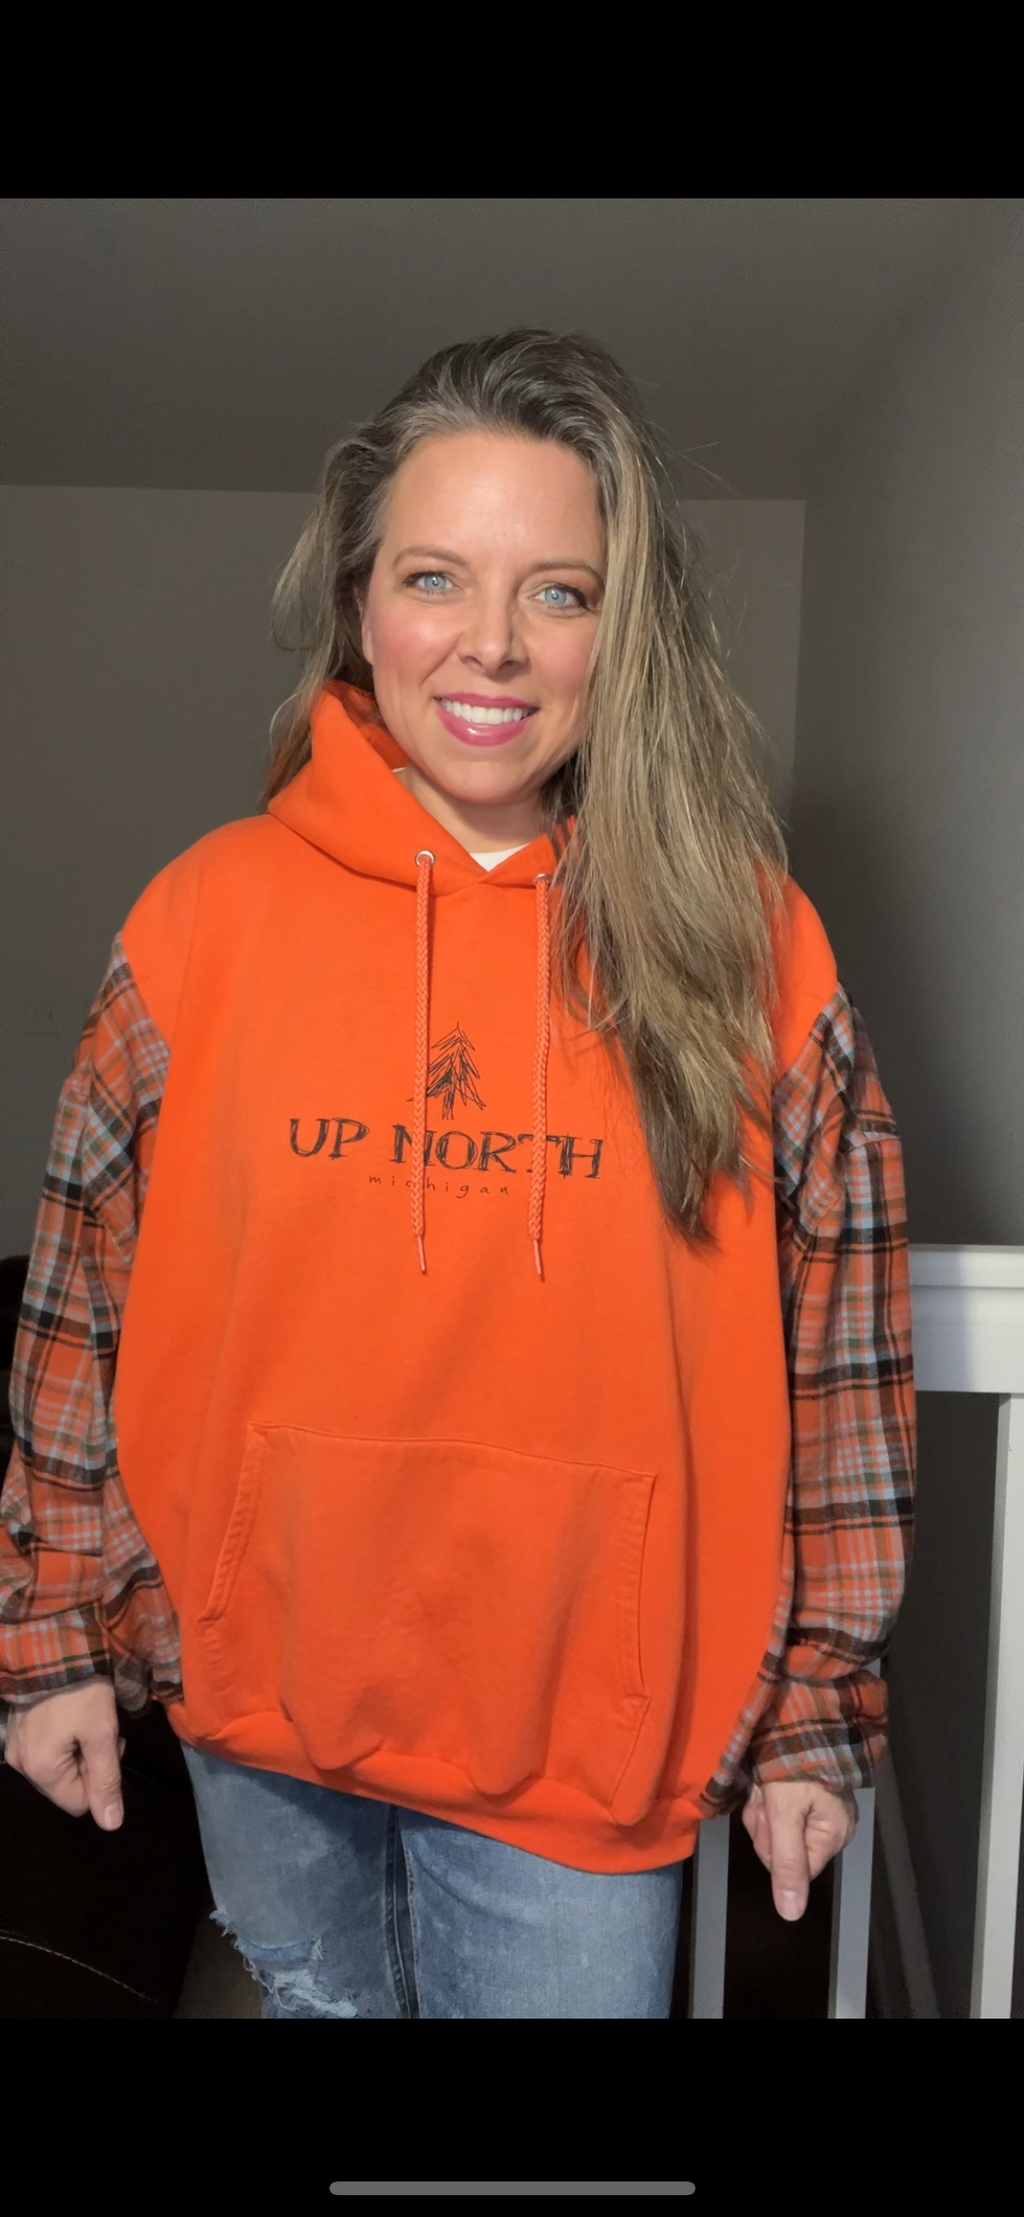 Upcycled Upnorth – women’s 1X – middleweight sweatshirt with flannel sleeves￼